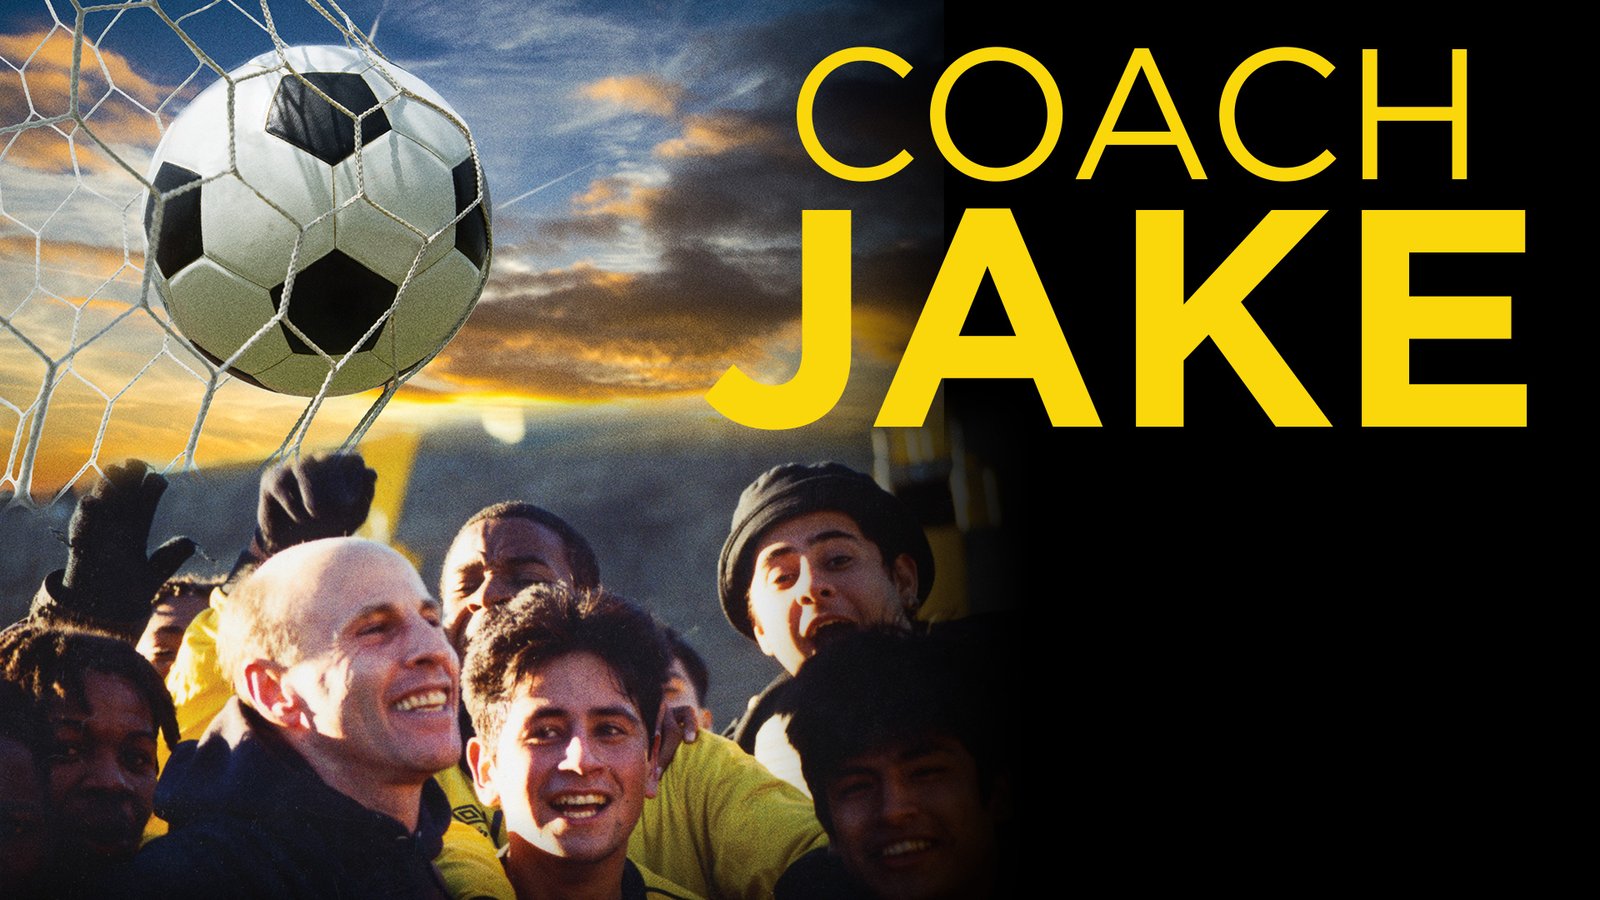 Coach Jake - The Coach who Built An Unstoppable Team